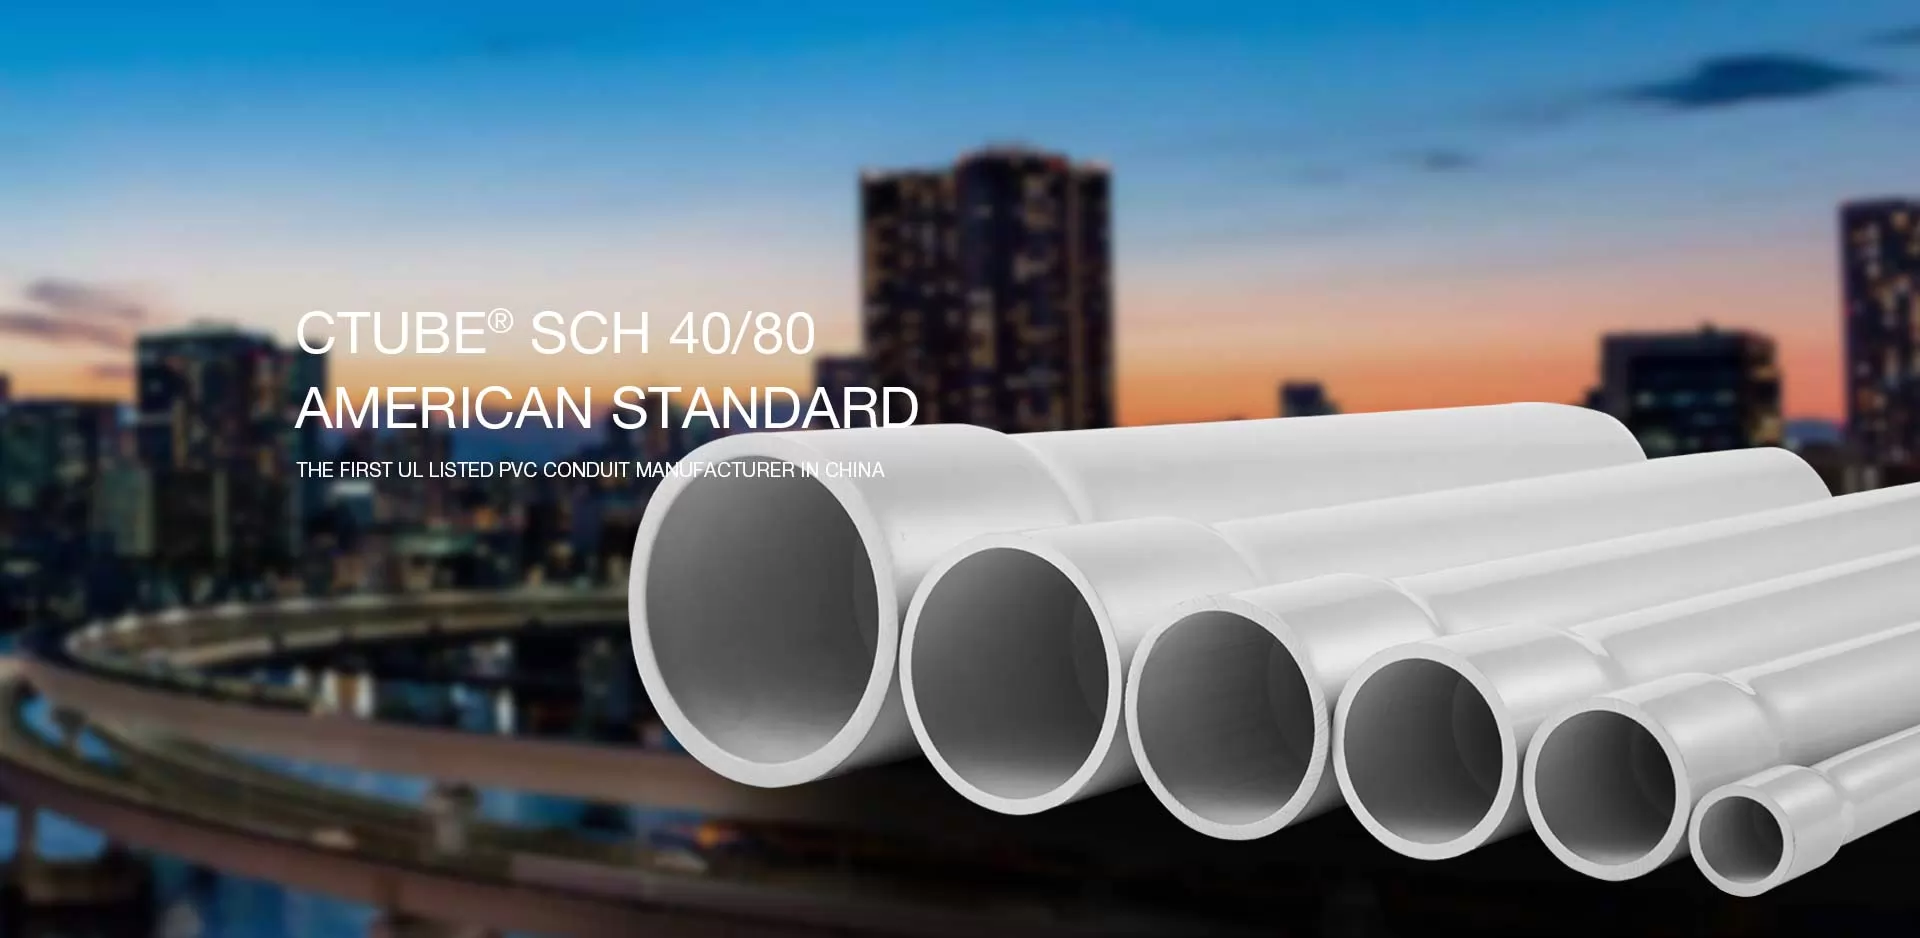 CTUBE® SCH 40/80 AMERICAN STANDARD THE FIRST UL LISTED PVC CONDUIT MANUFACTURER IN CHINA